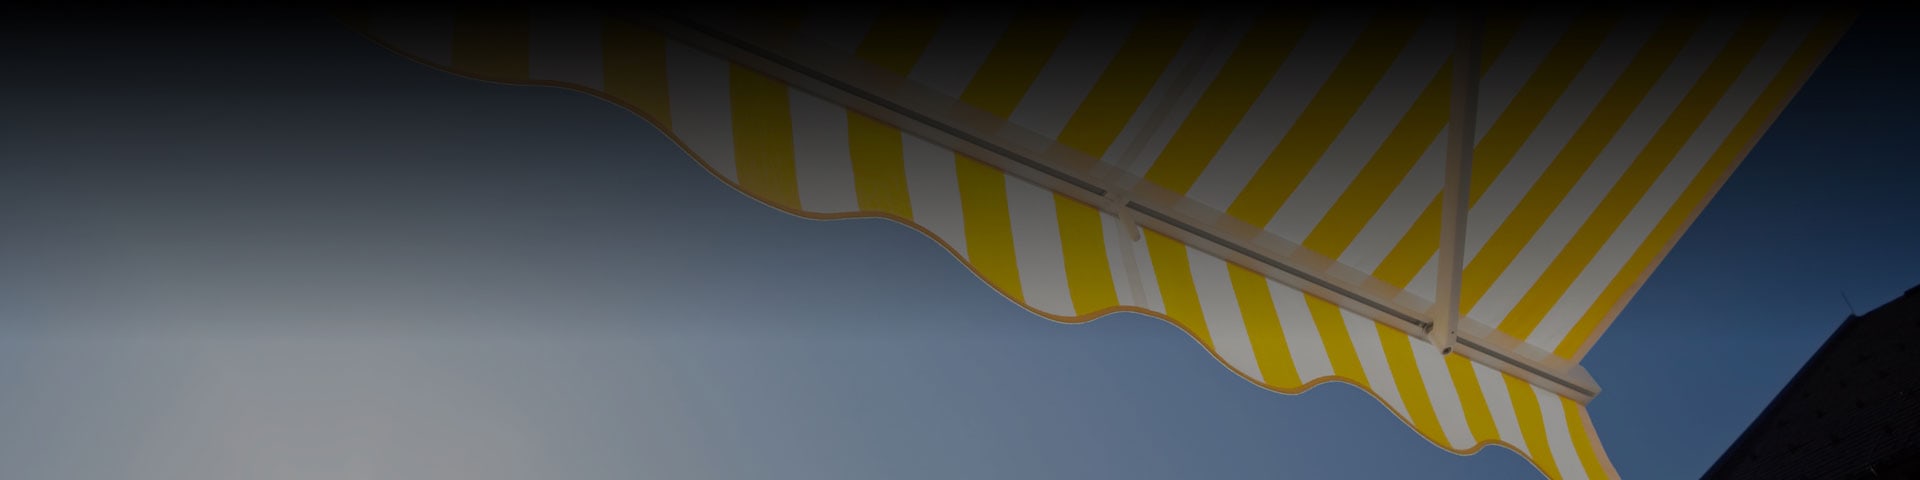 Under view of yellow and white striped patio awning